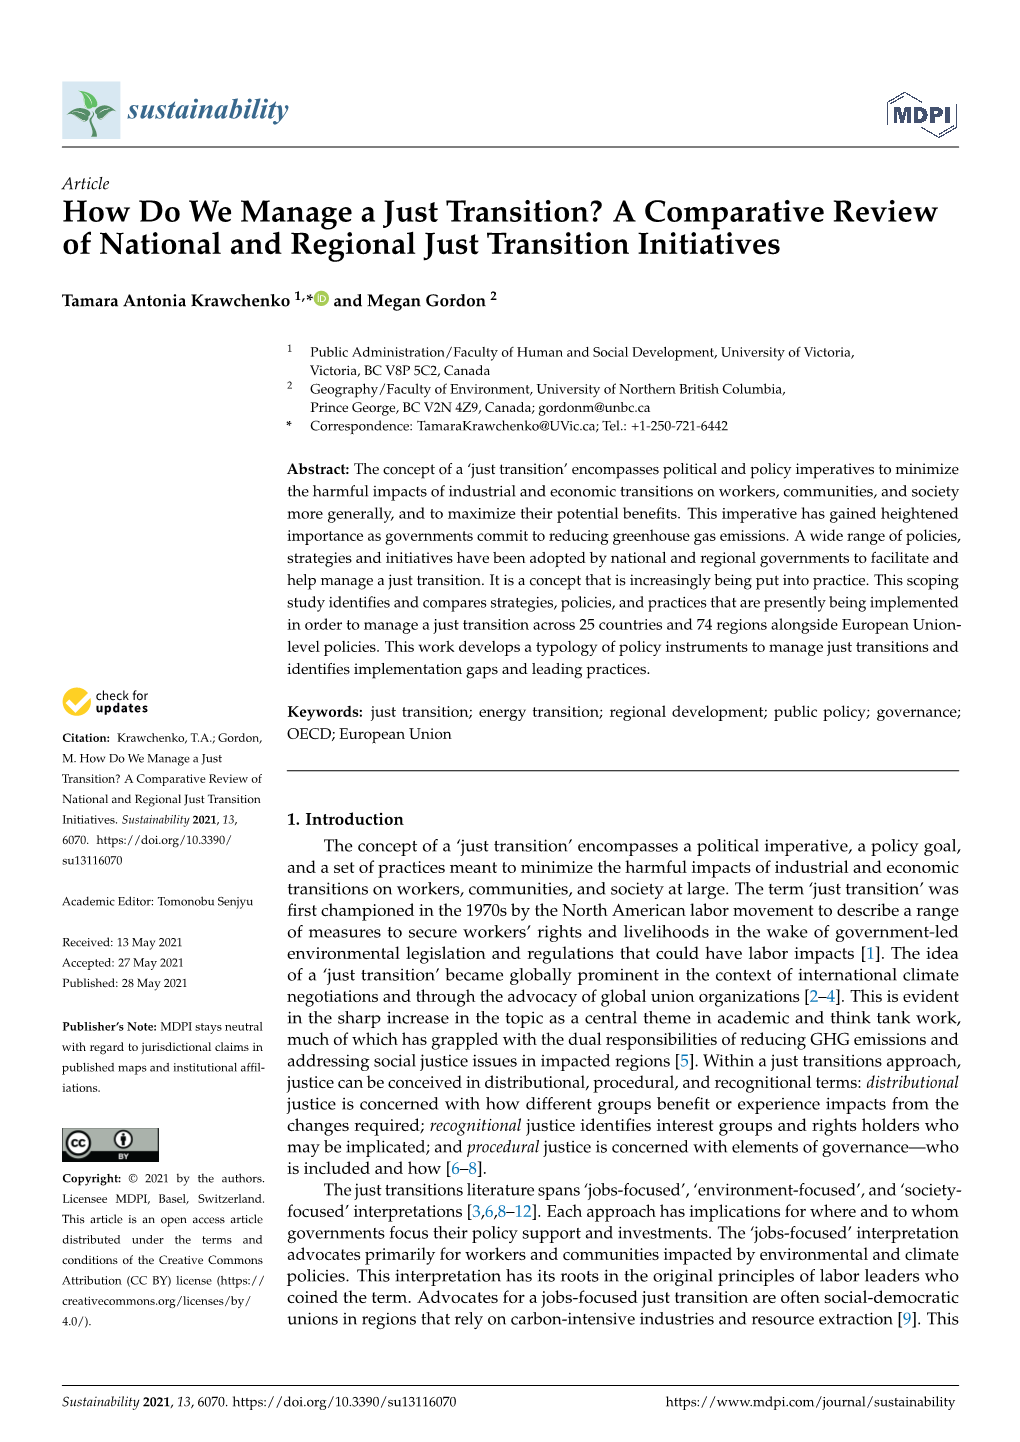 How Do We Manage a Just Transition? a Comparative Review of National and Regional Just Transition Initiatives